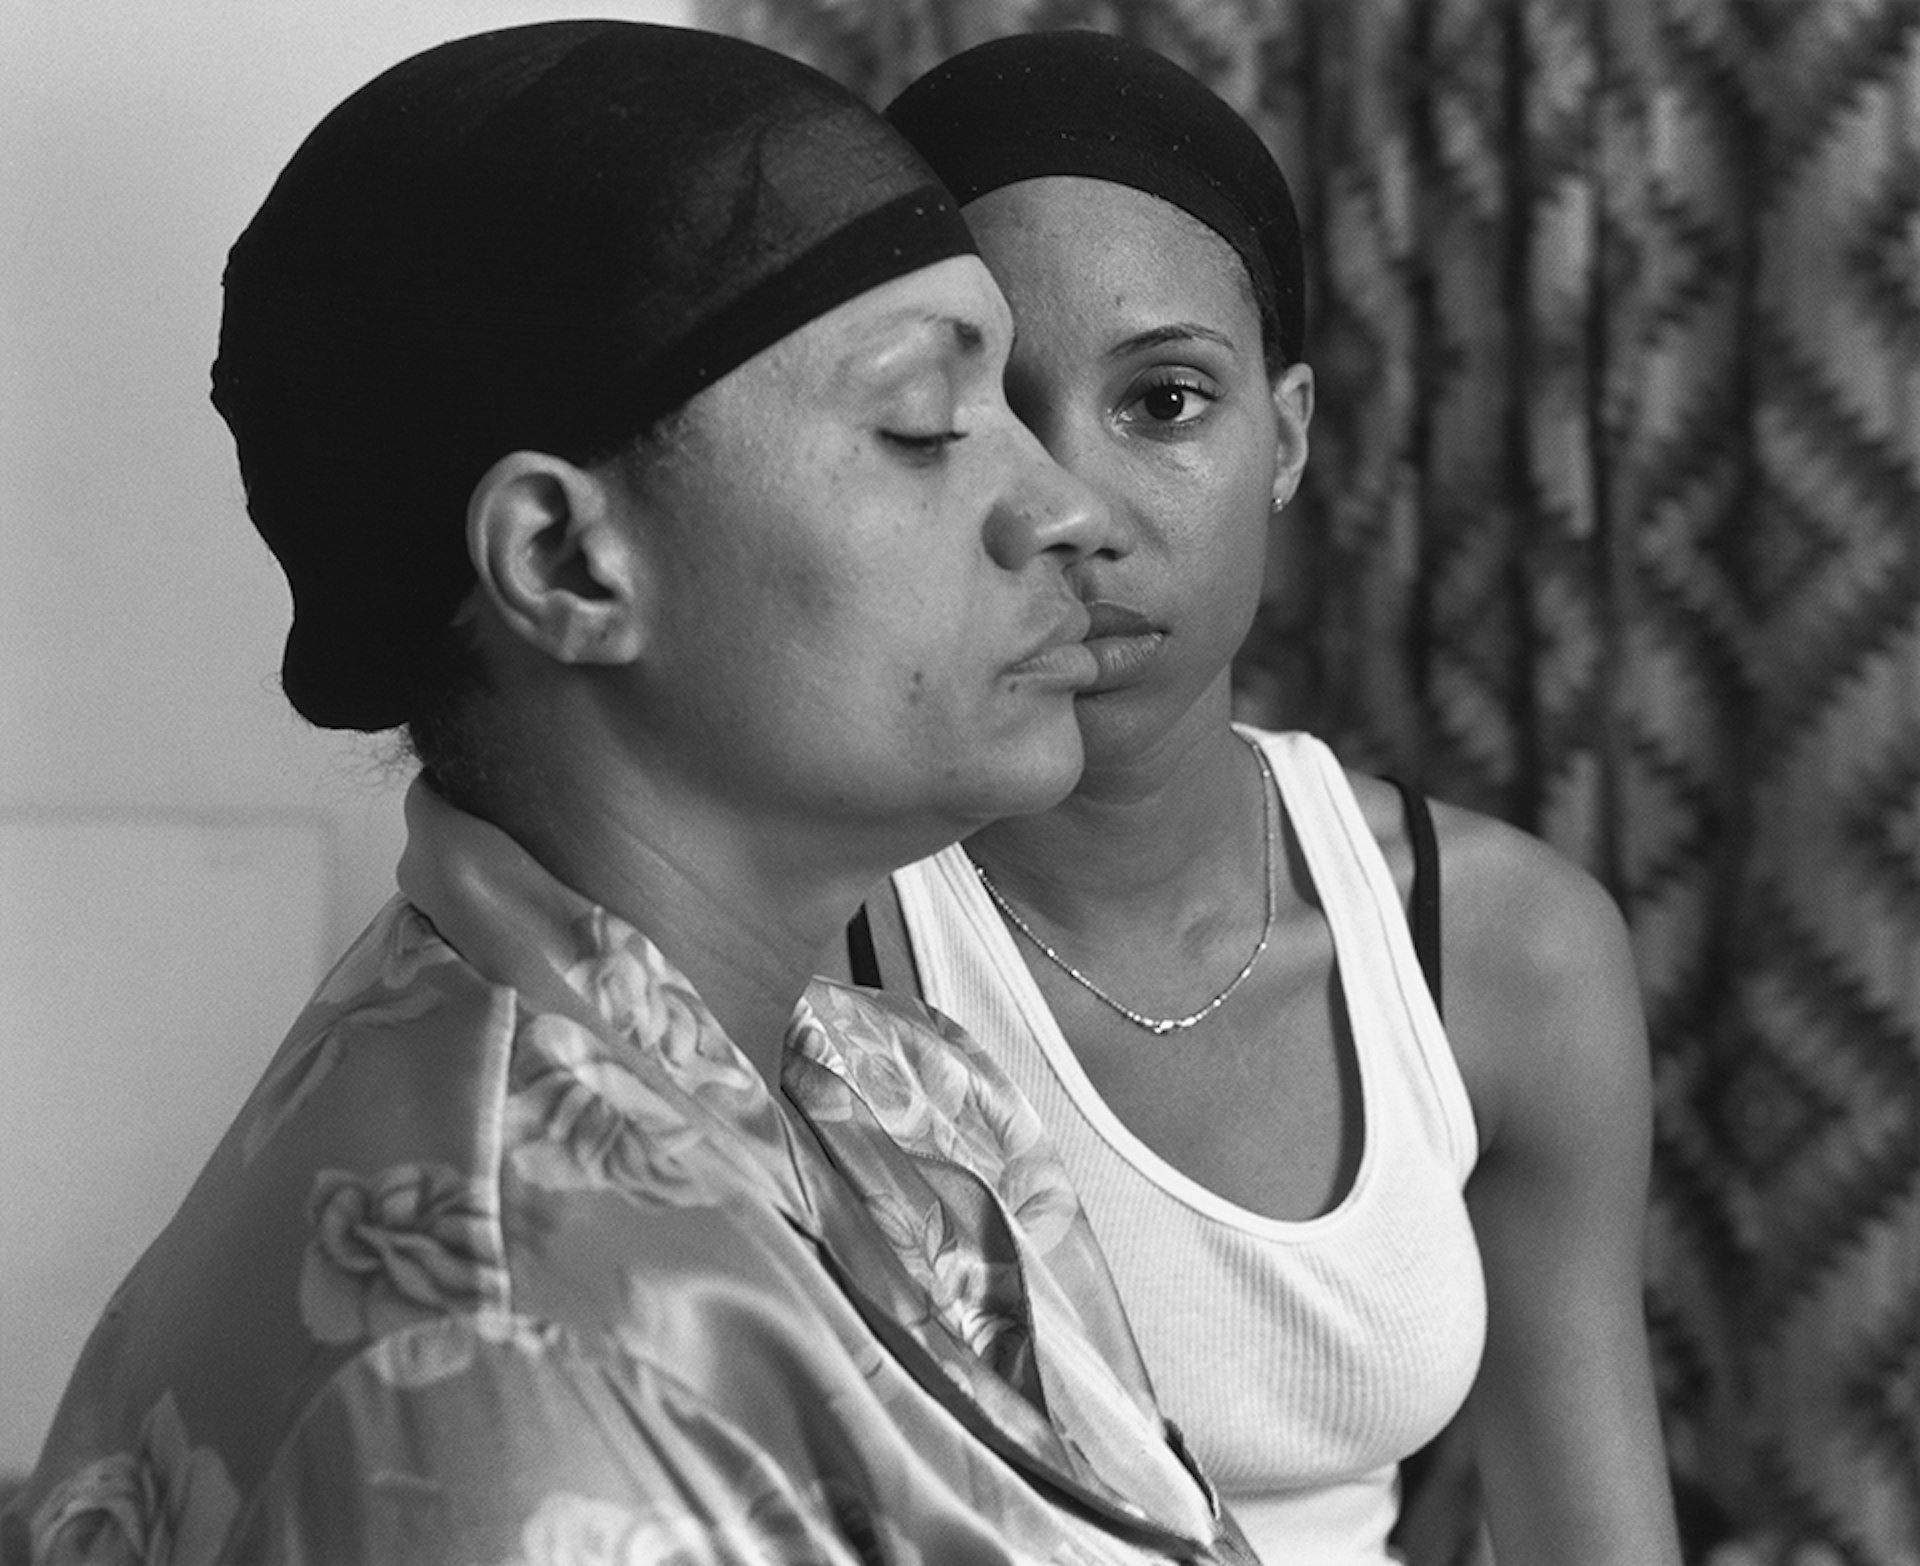 Momme, 2008. LaToya Ruby Frazier. From The Notion of Family published by Aperture.